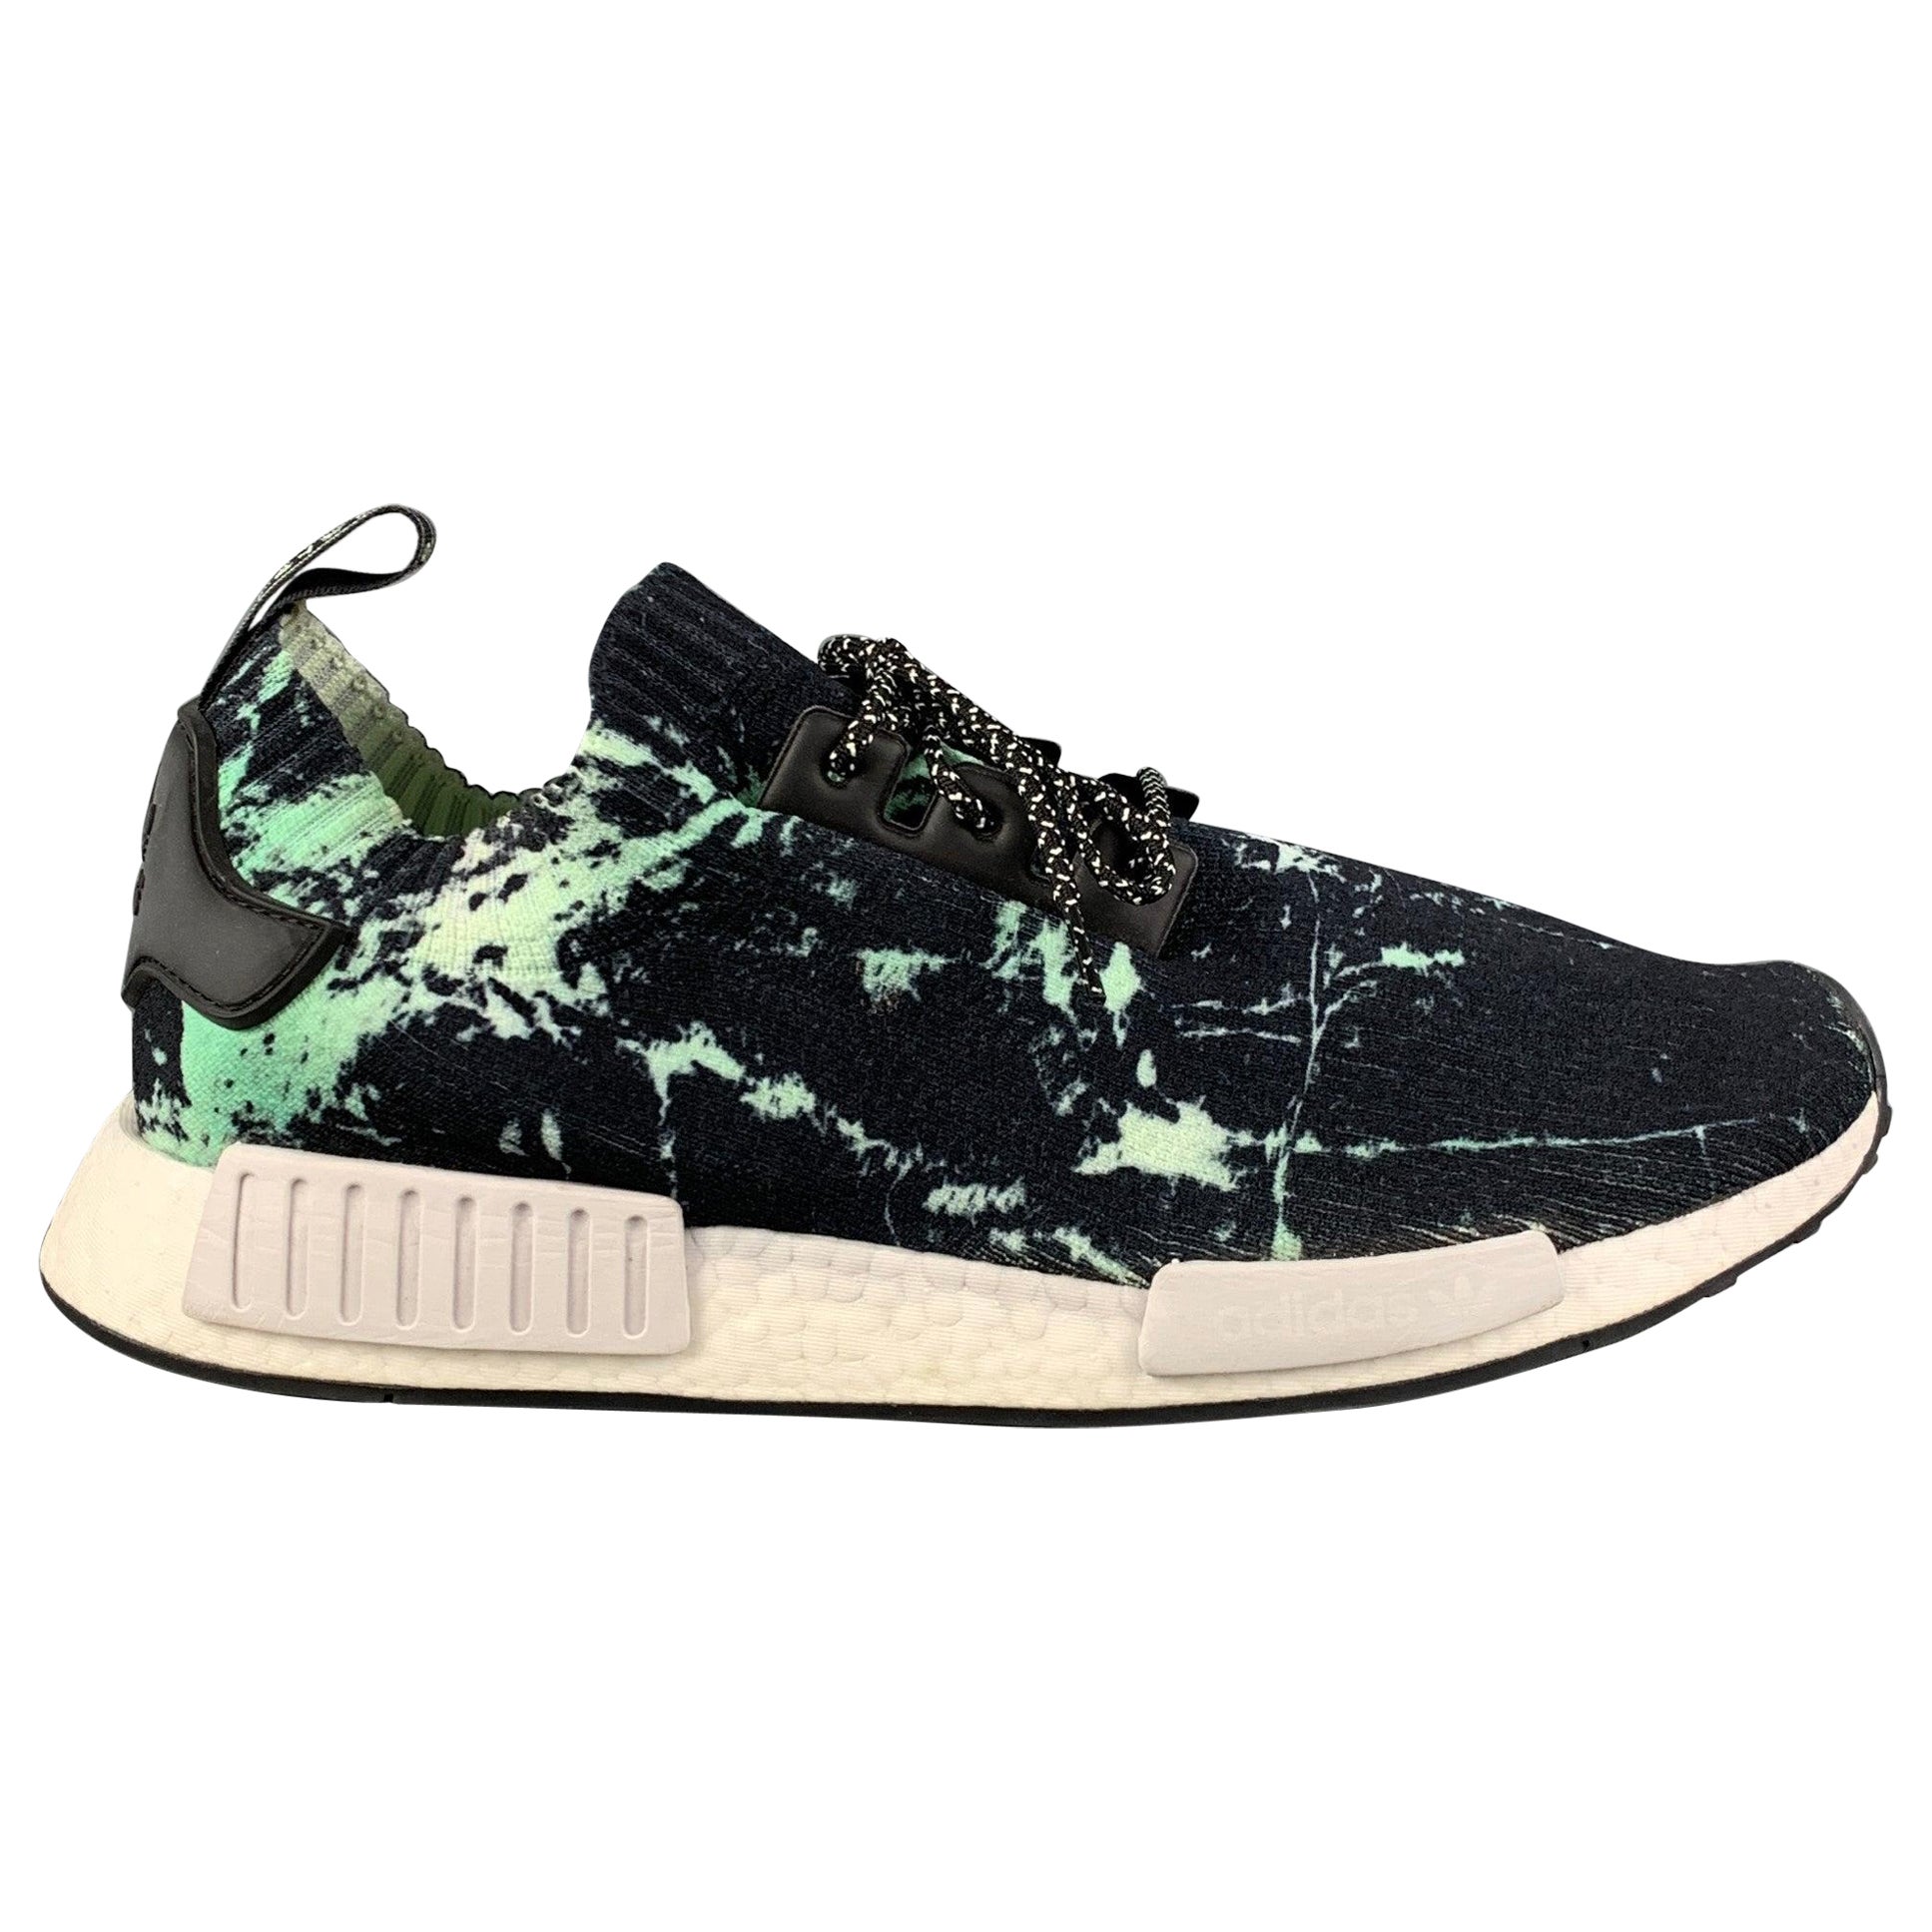 ADIDAS NMD R1 PK Size 12.5 Black Green Splattered Nylon Lace Up Sneakers For Sale